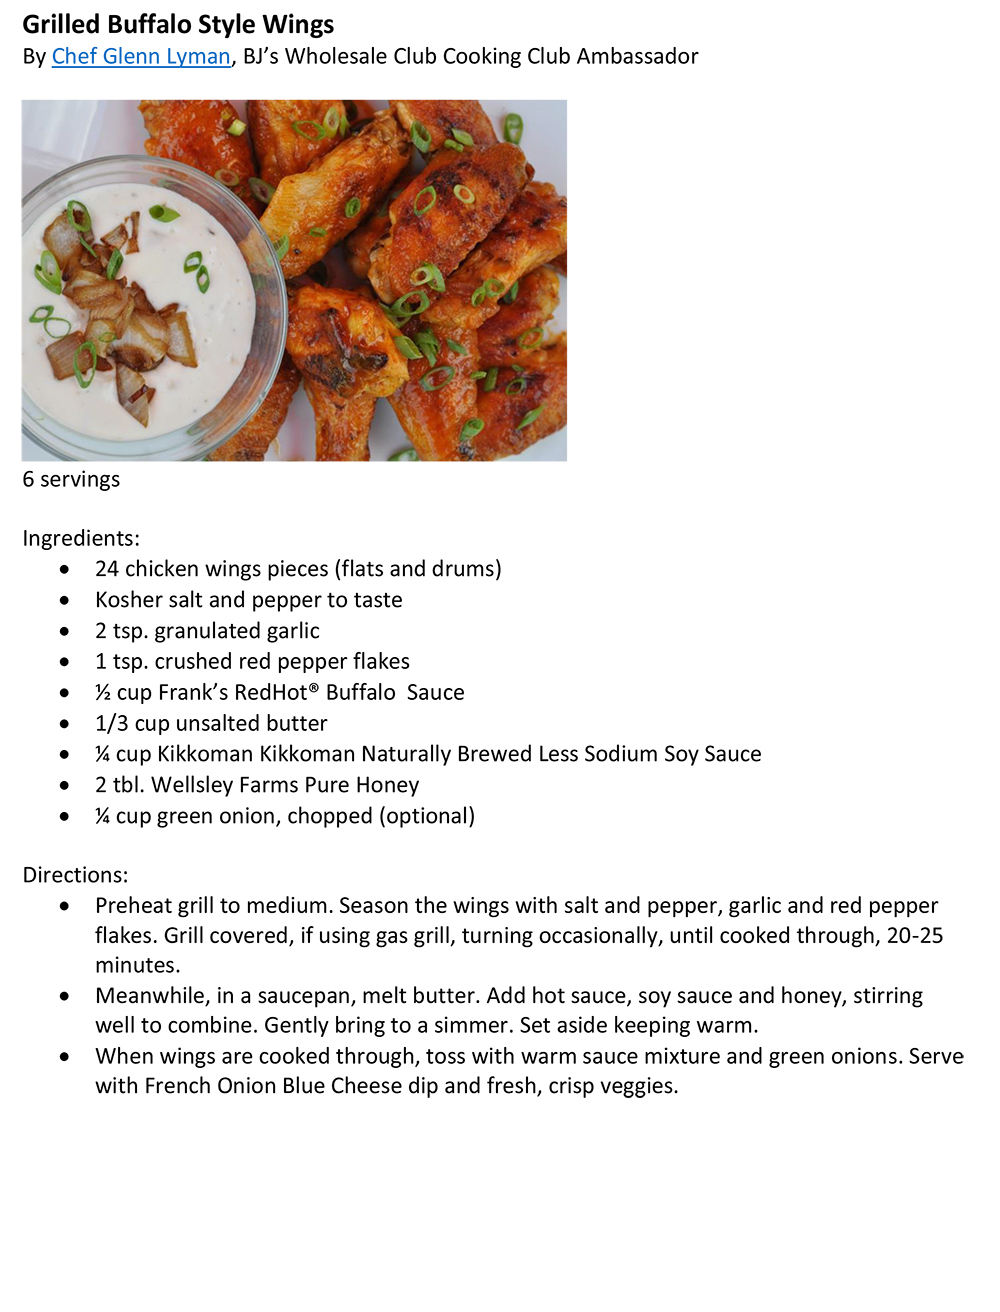 Grilled Style Buffalo Wings with French Onion Dip Recipe